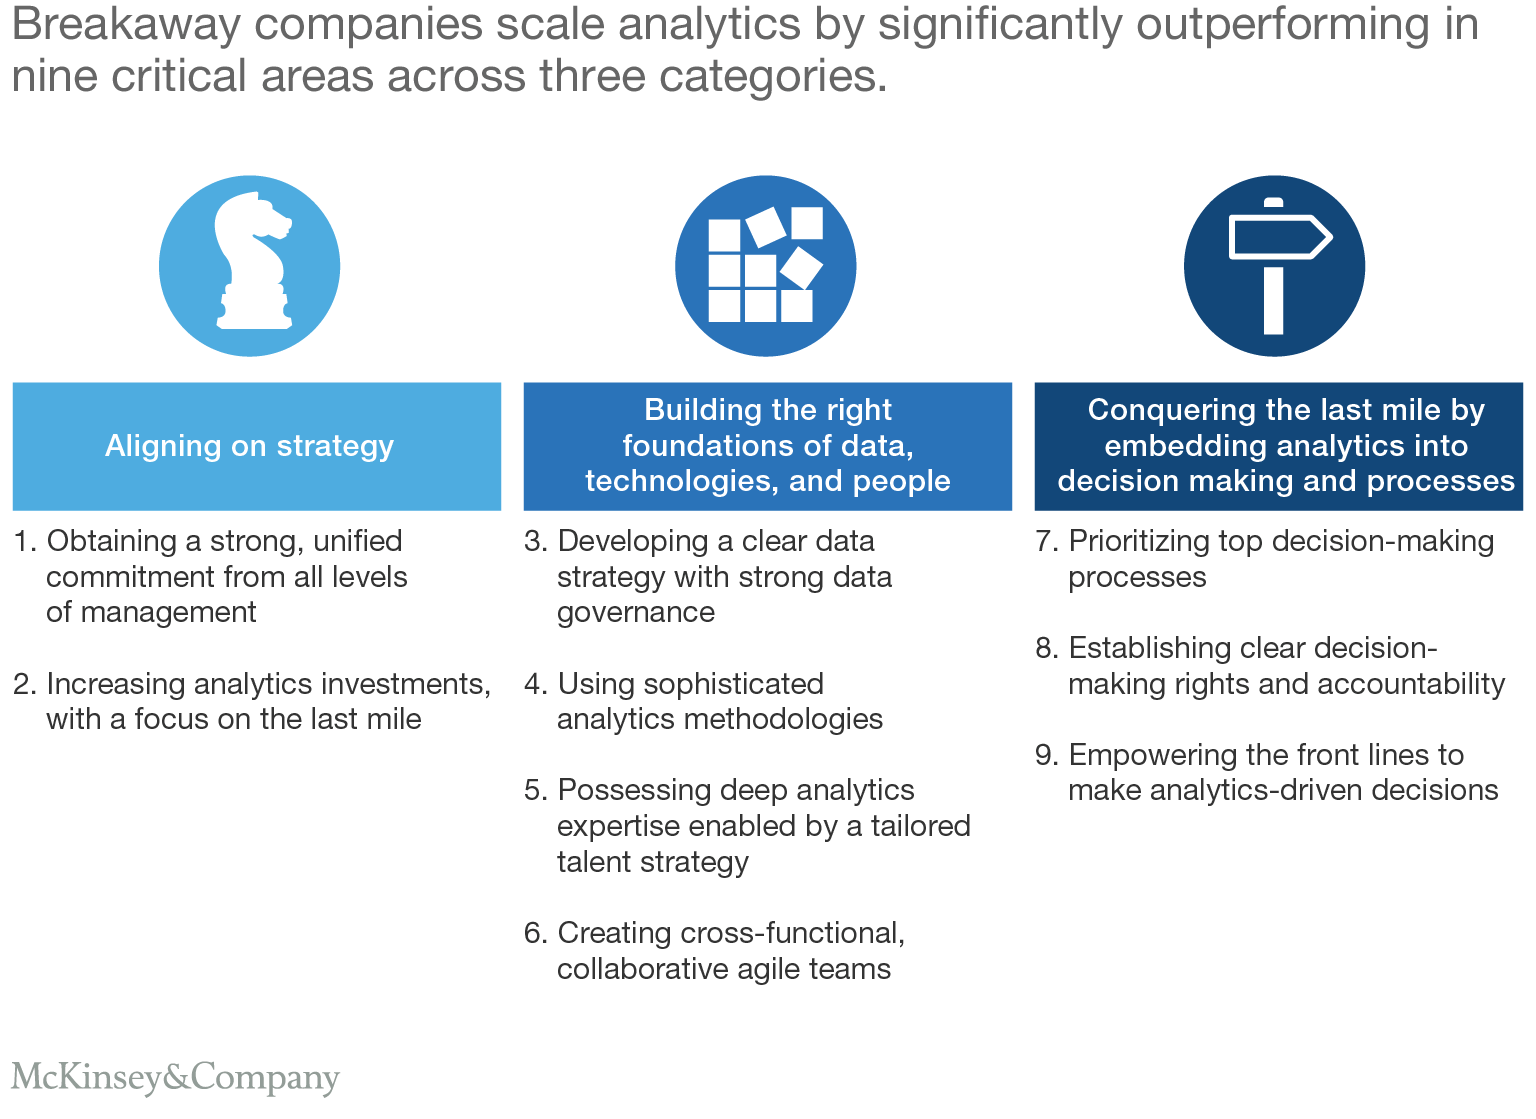 Breakaway companies scale analytics by significantly outperforming in nine critical areas across three categories.